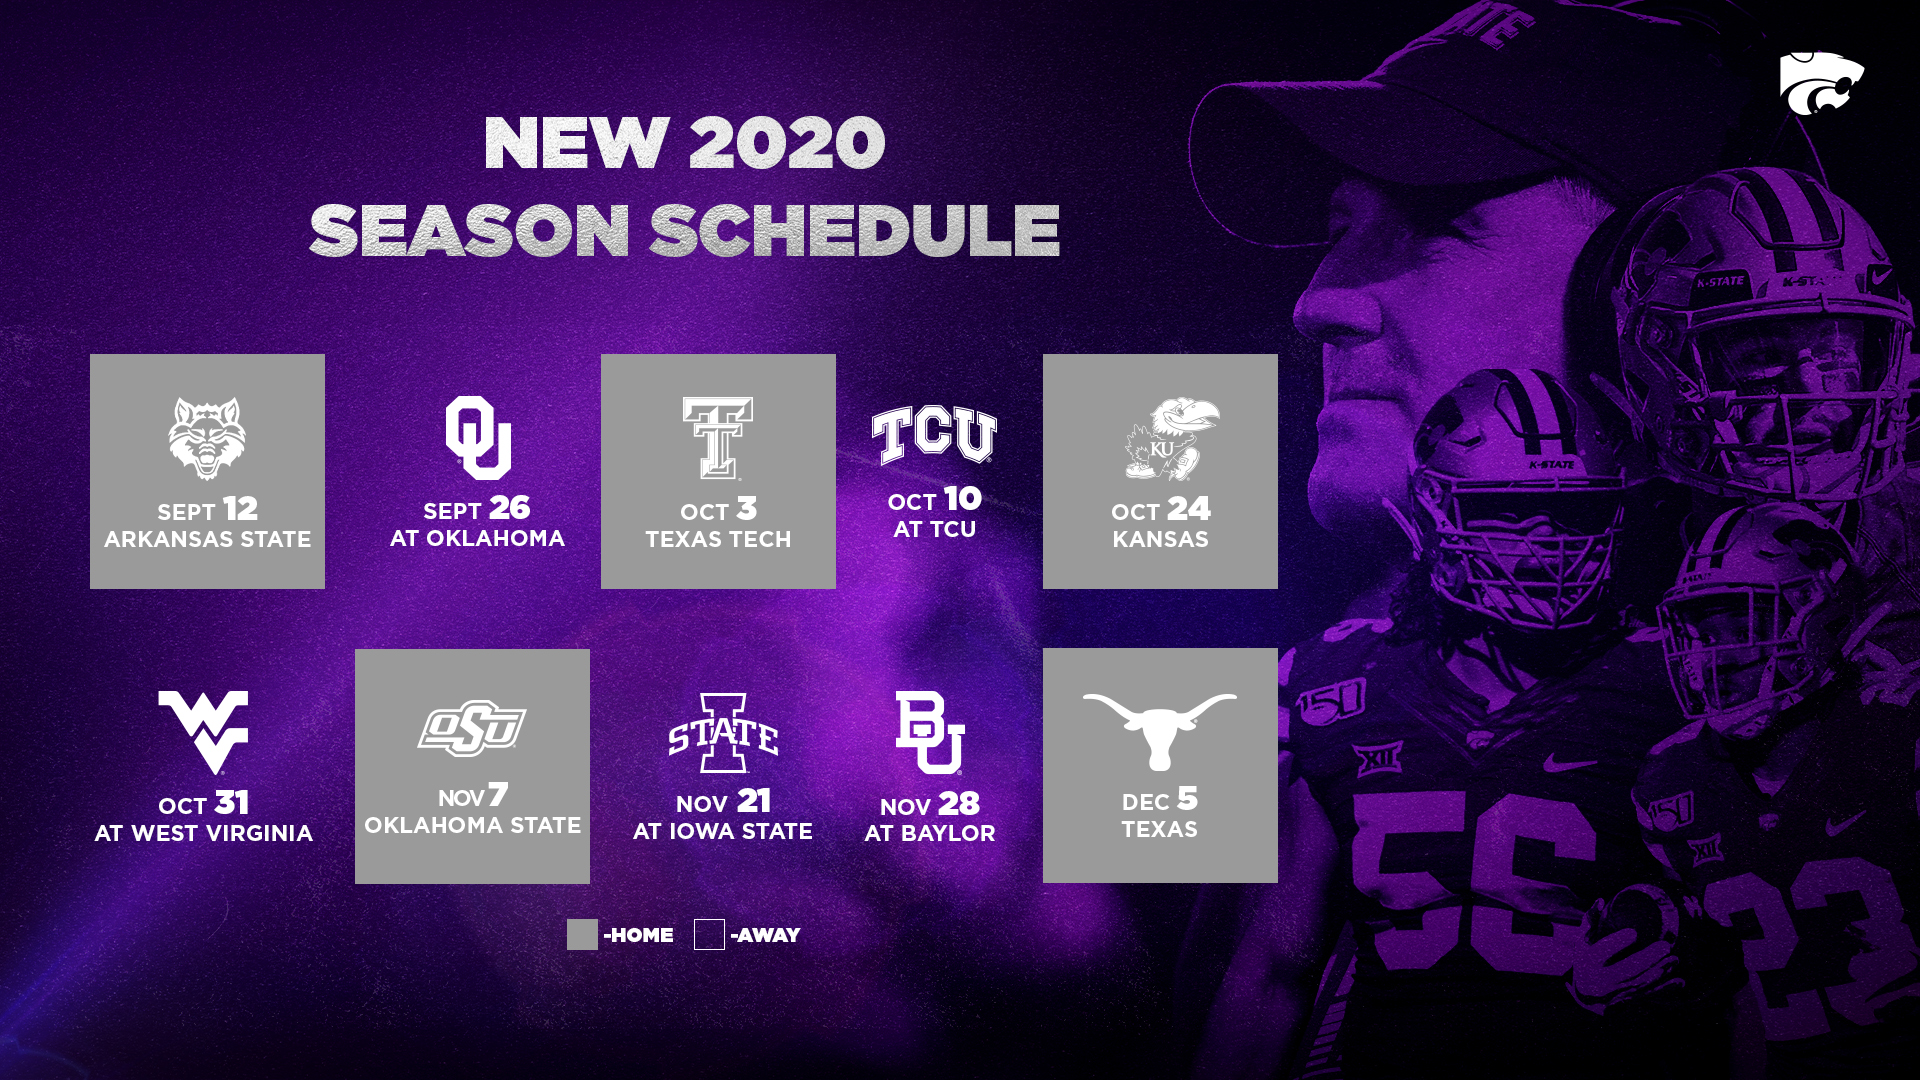 Kansas State 2022 Football Schedule K-State Announces New College Football Schedule For 2020 Season | Sunflower  State Radio